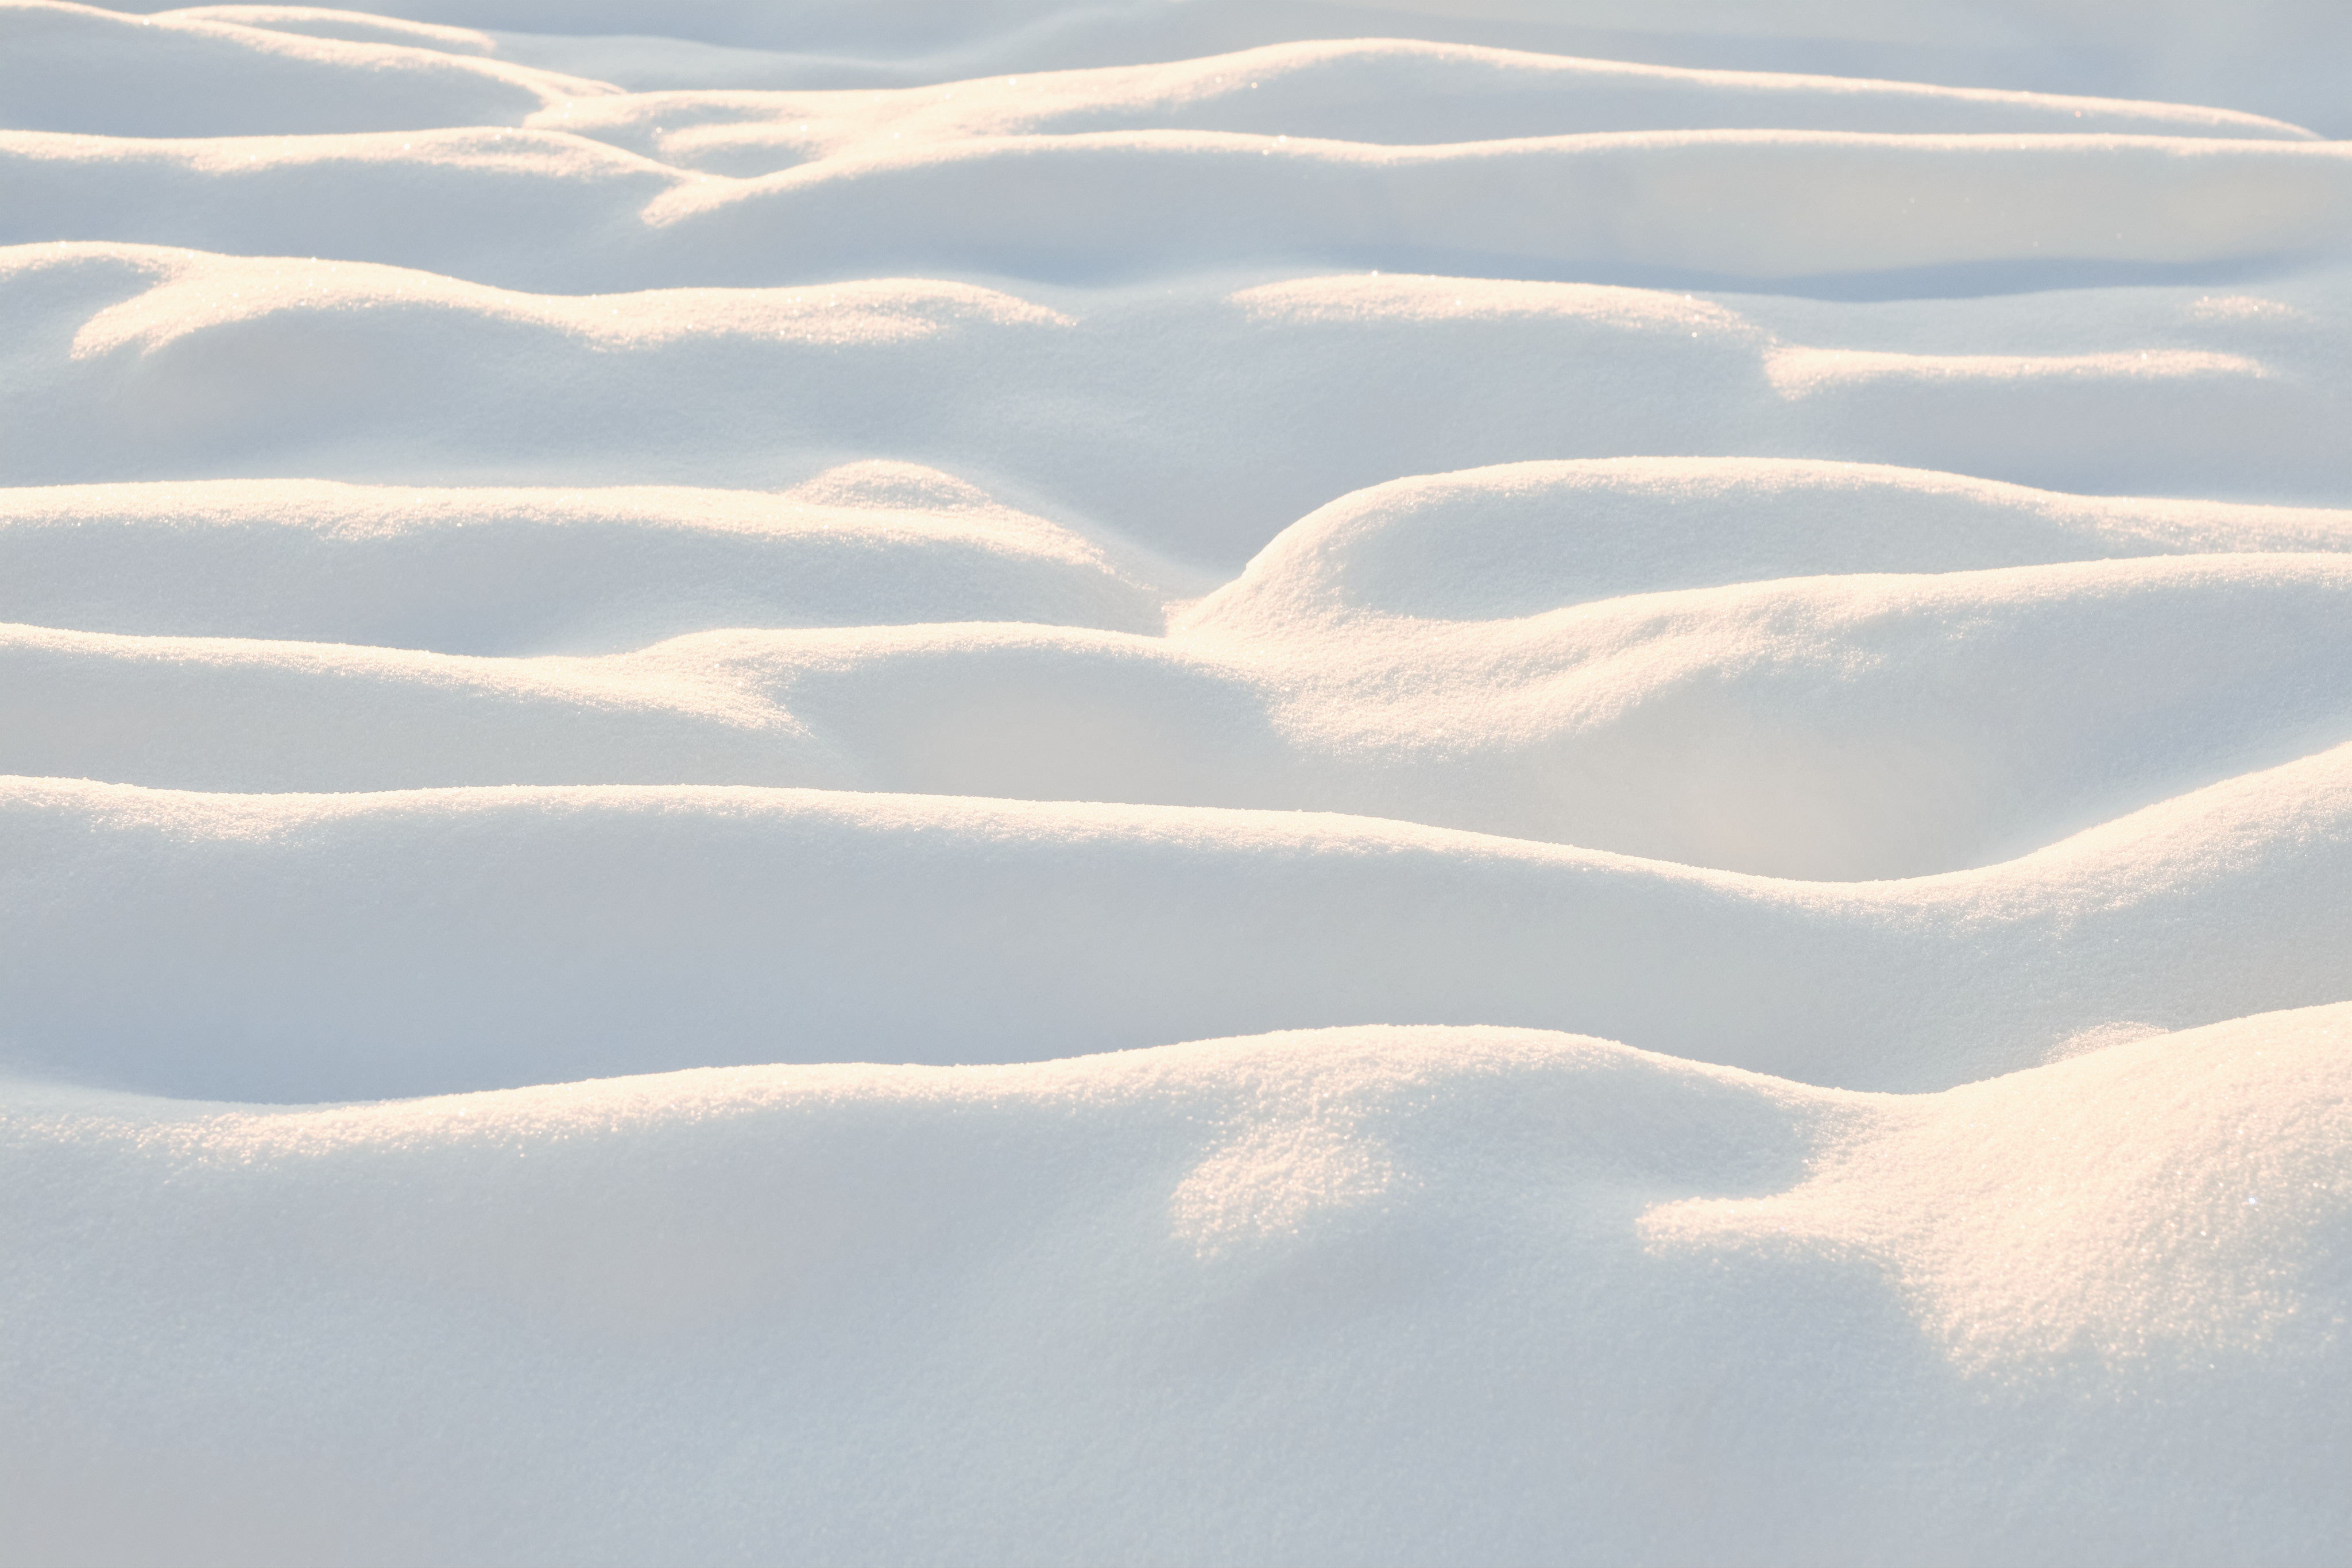 Another detail of snow shaped by the wind.